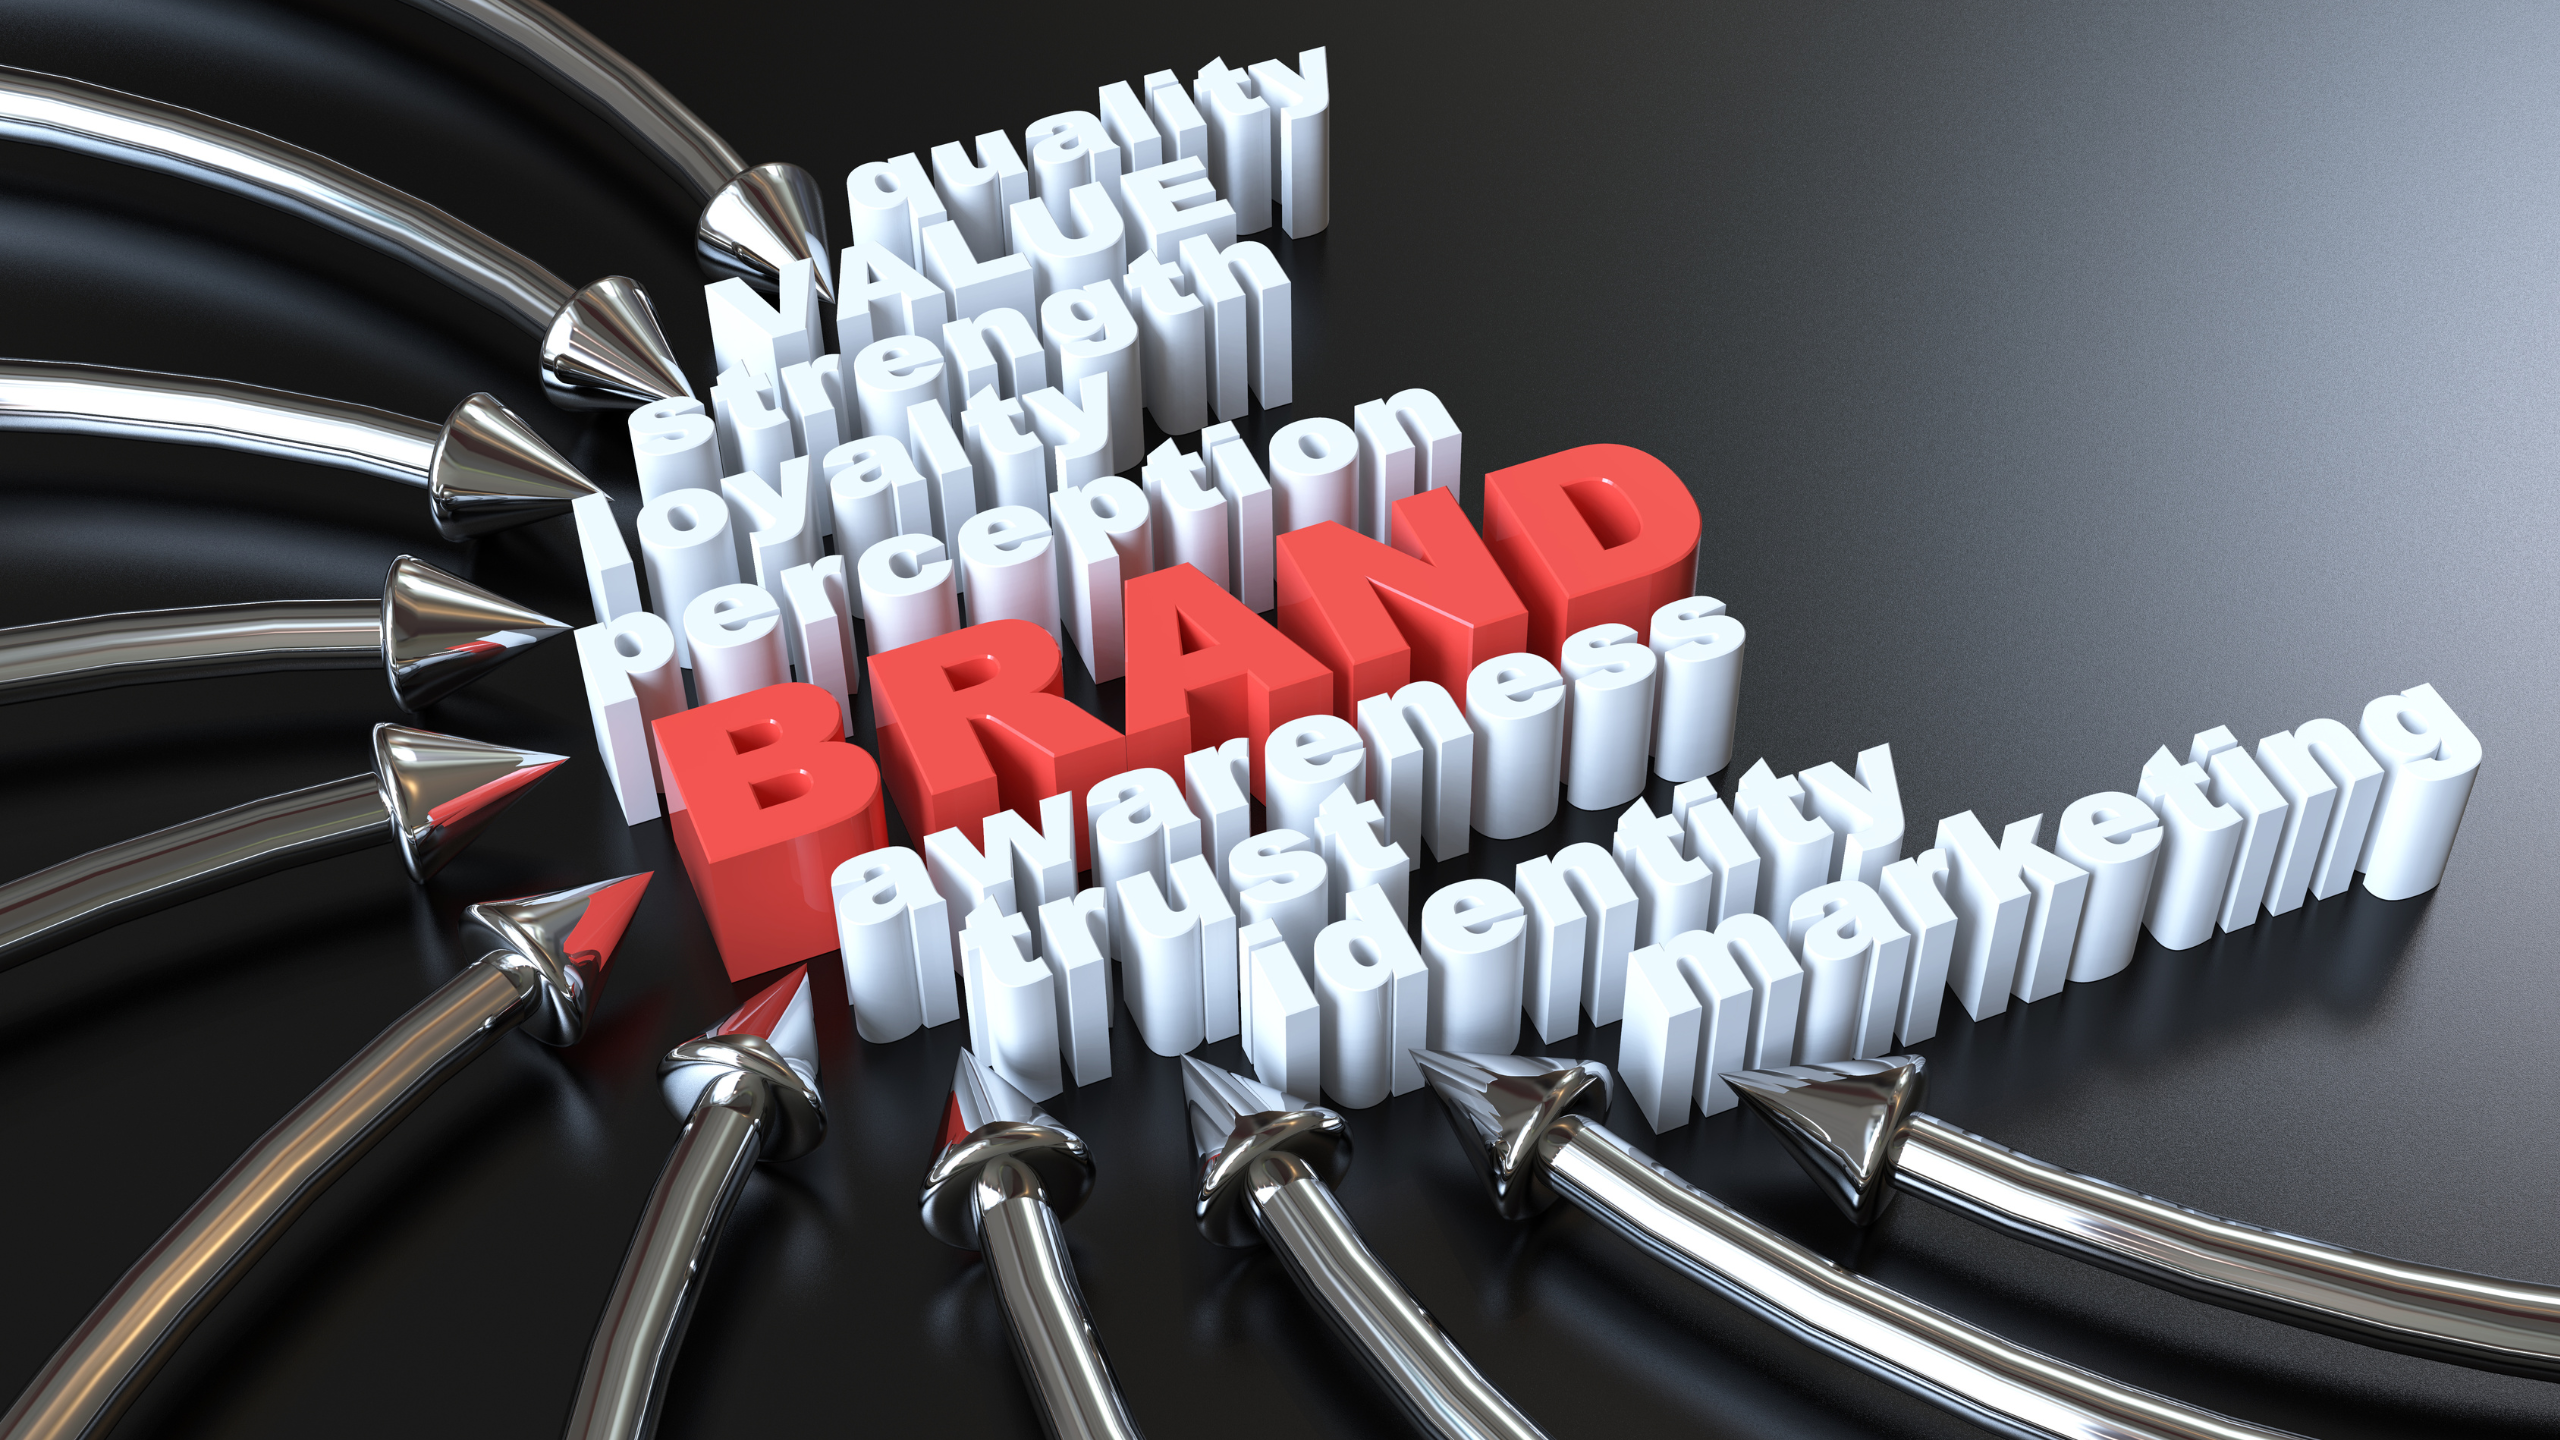 brand and reputation management - 360WiSE